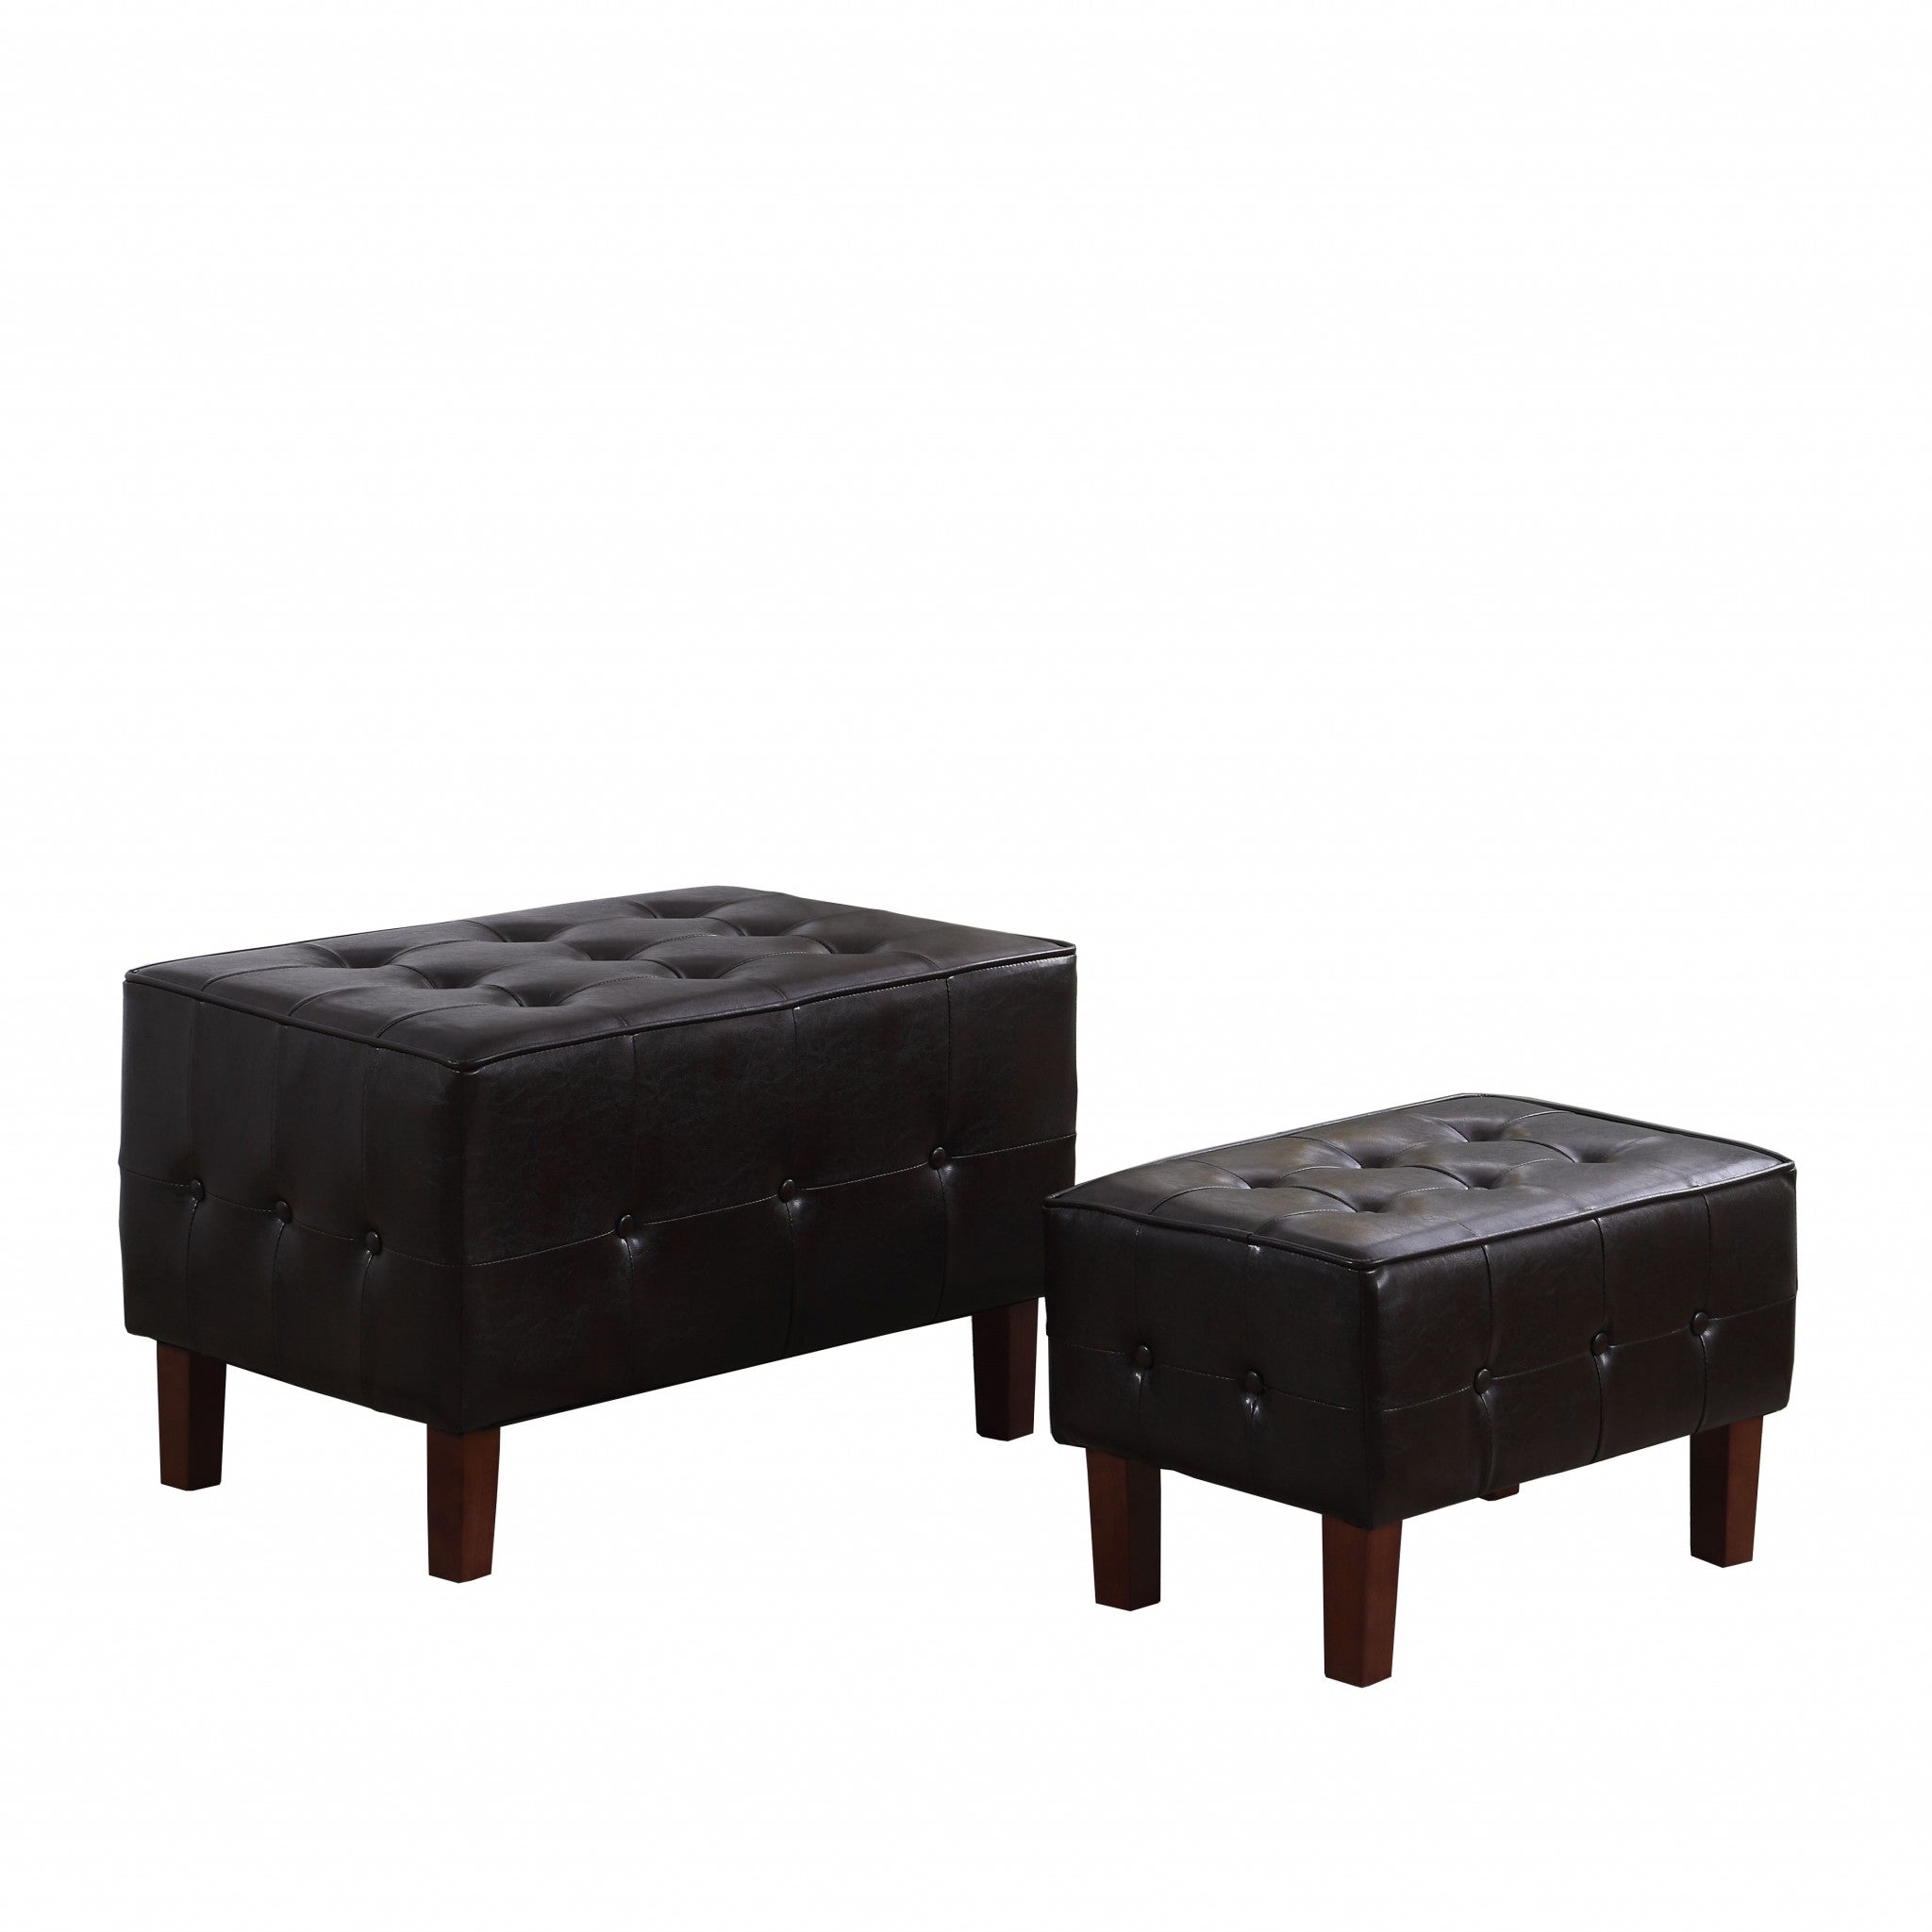 20" Black Faux Leather And Dark Brown Tufted Cocktail Ottoman